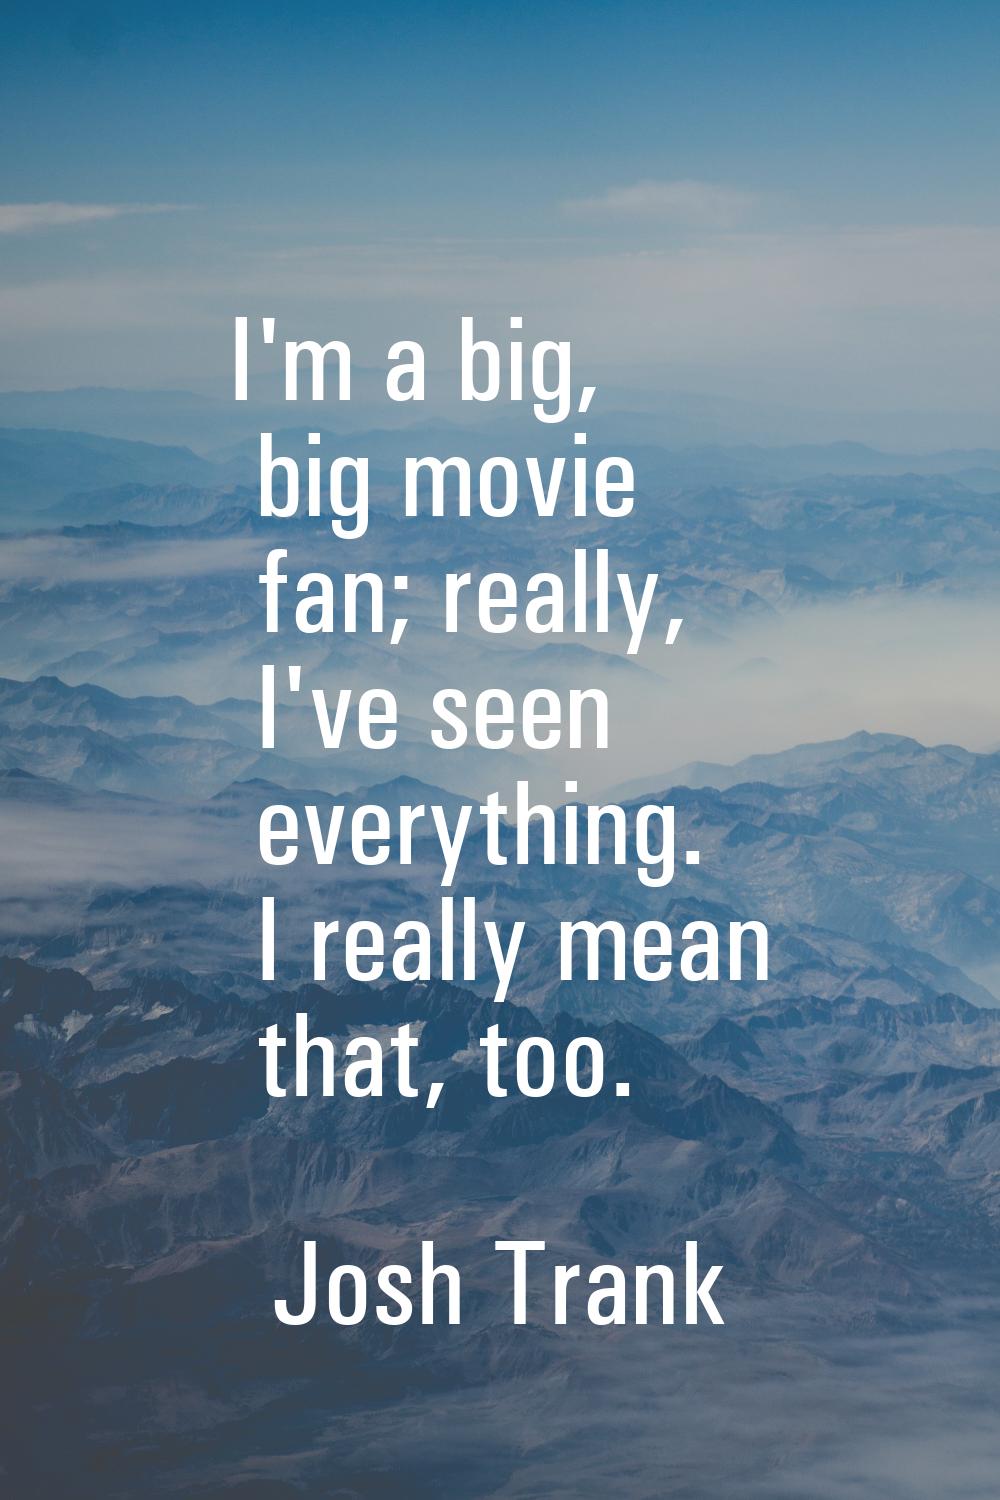 I'm a big, big movie fan; really, I've seen everything. I really mean that, too.